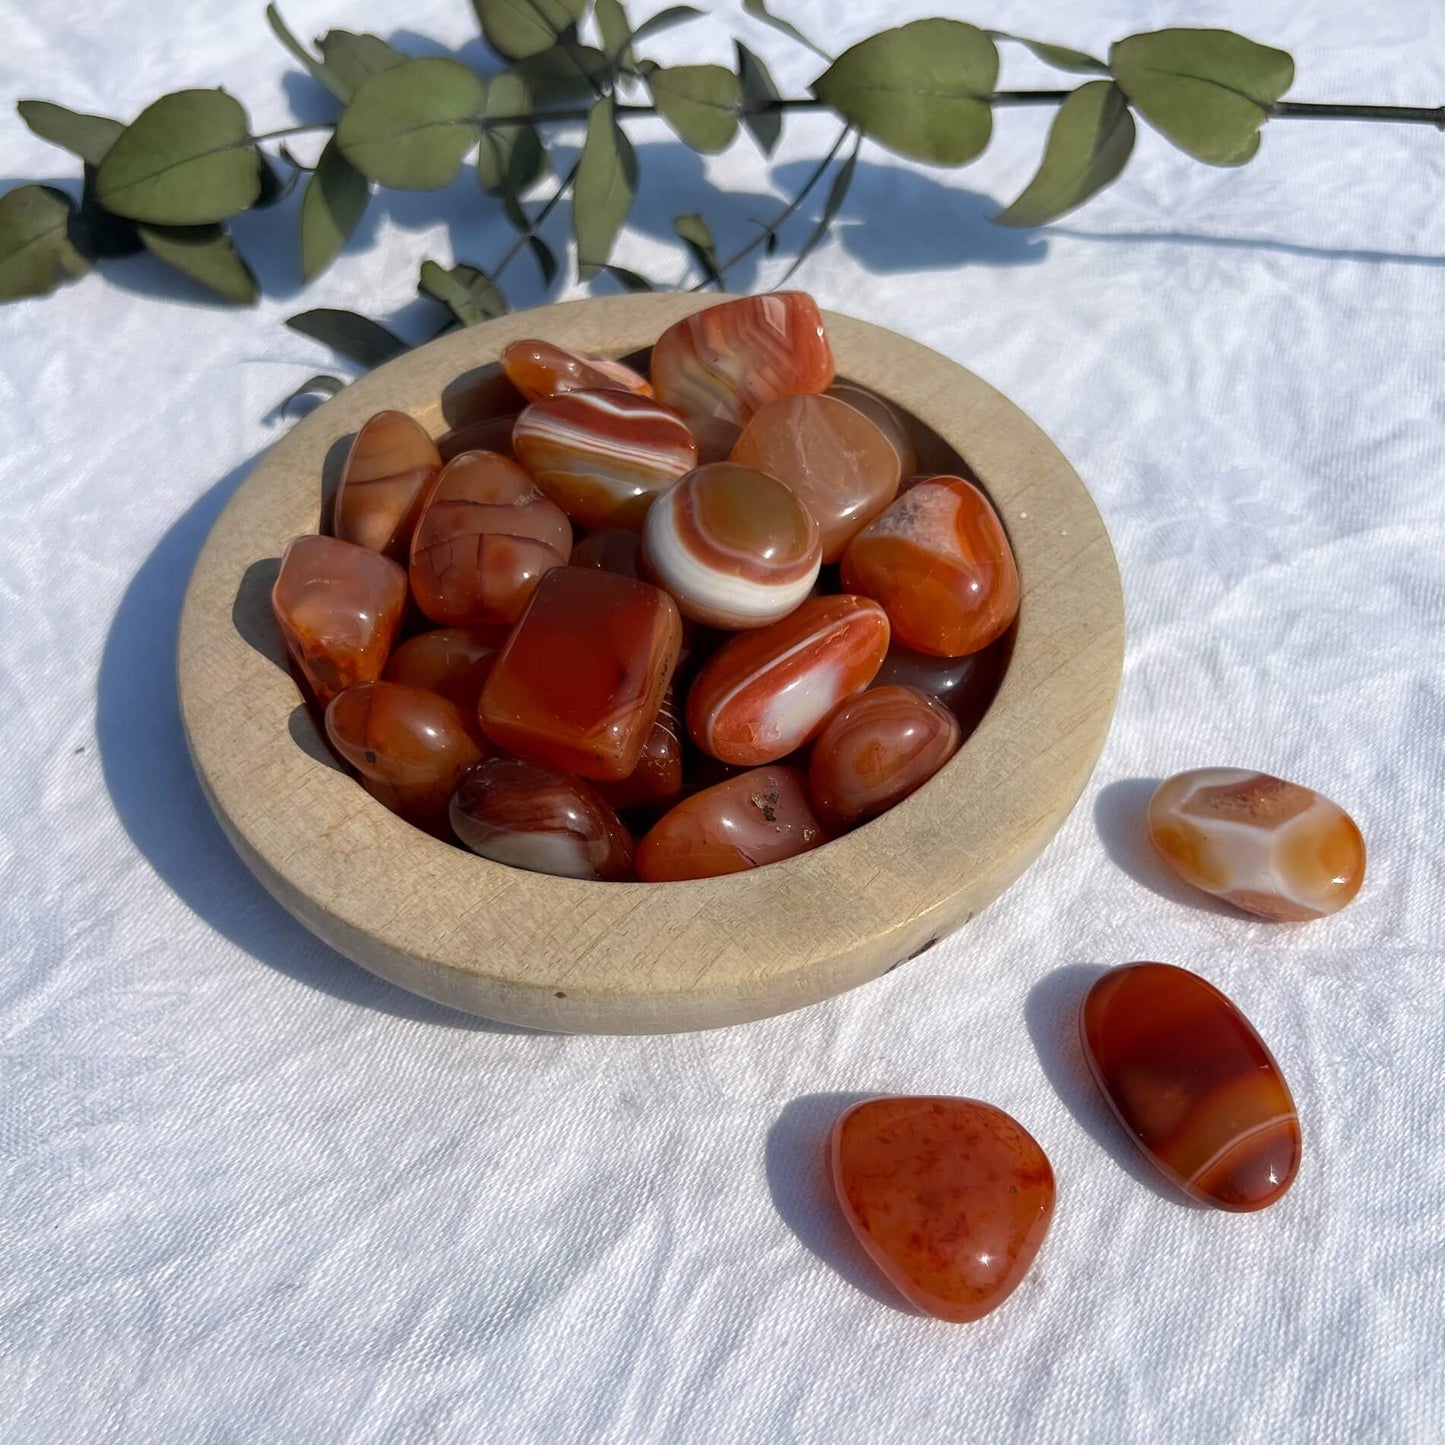 A wooden dish filled with vibrant red and orange patterned carnelian crystal tumblestones